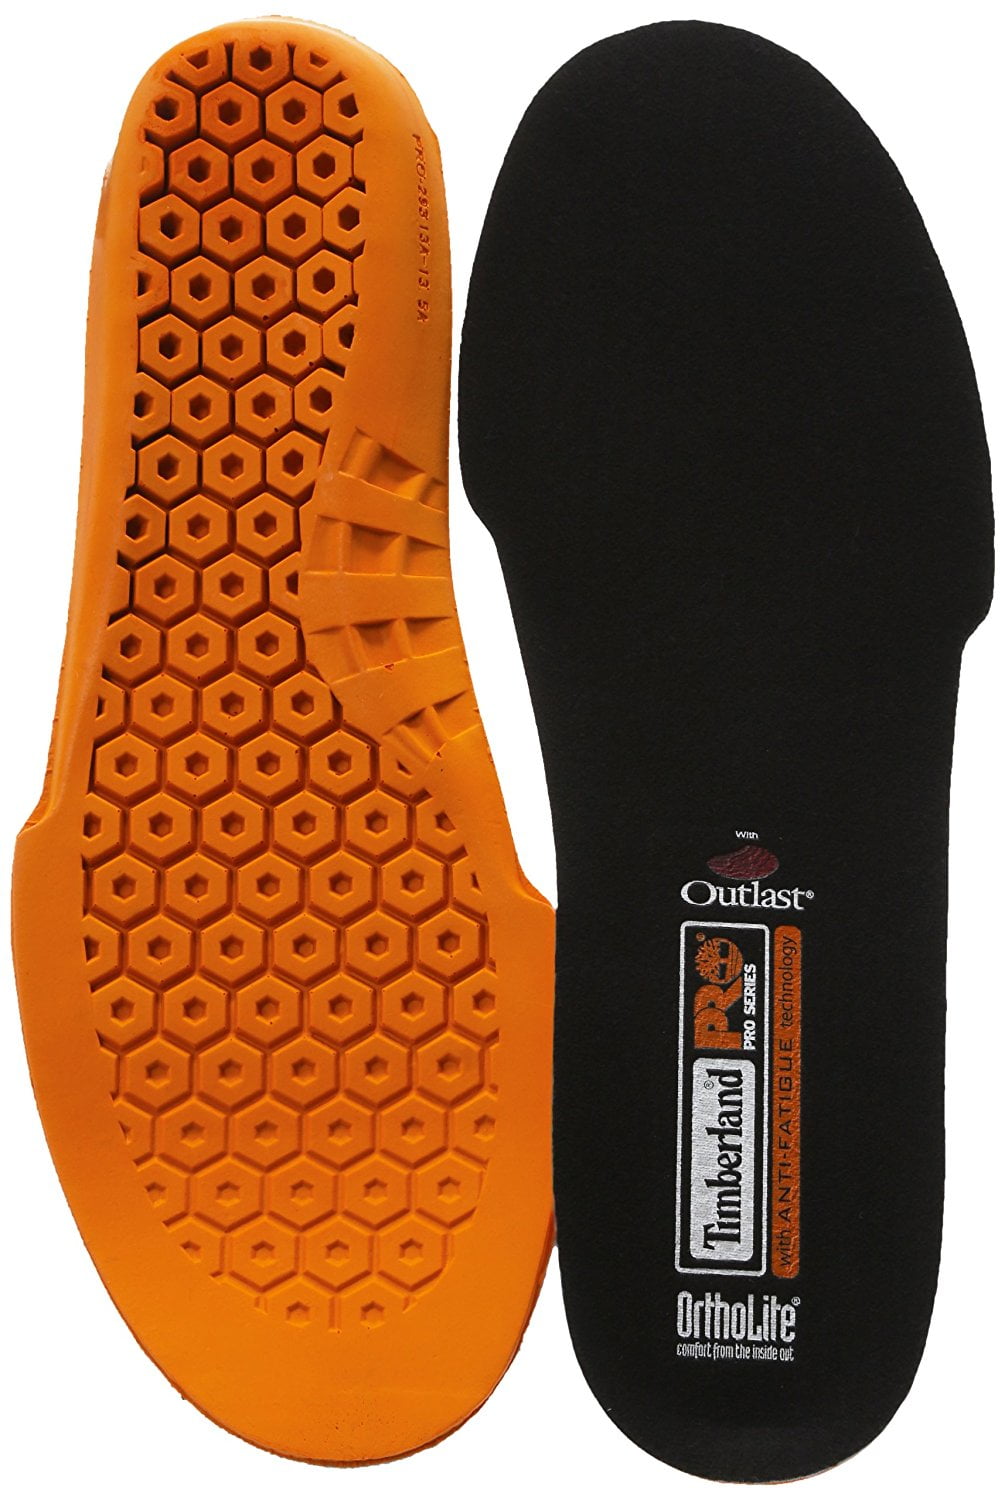 timberland work boot insoles